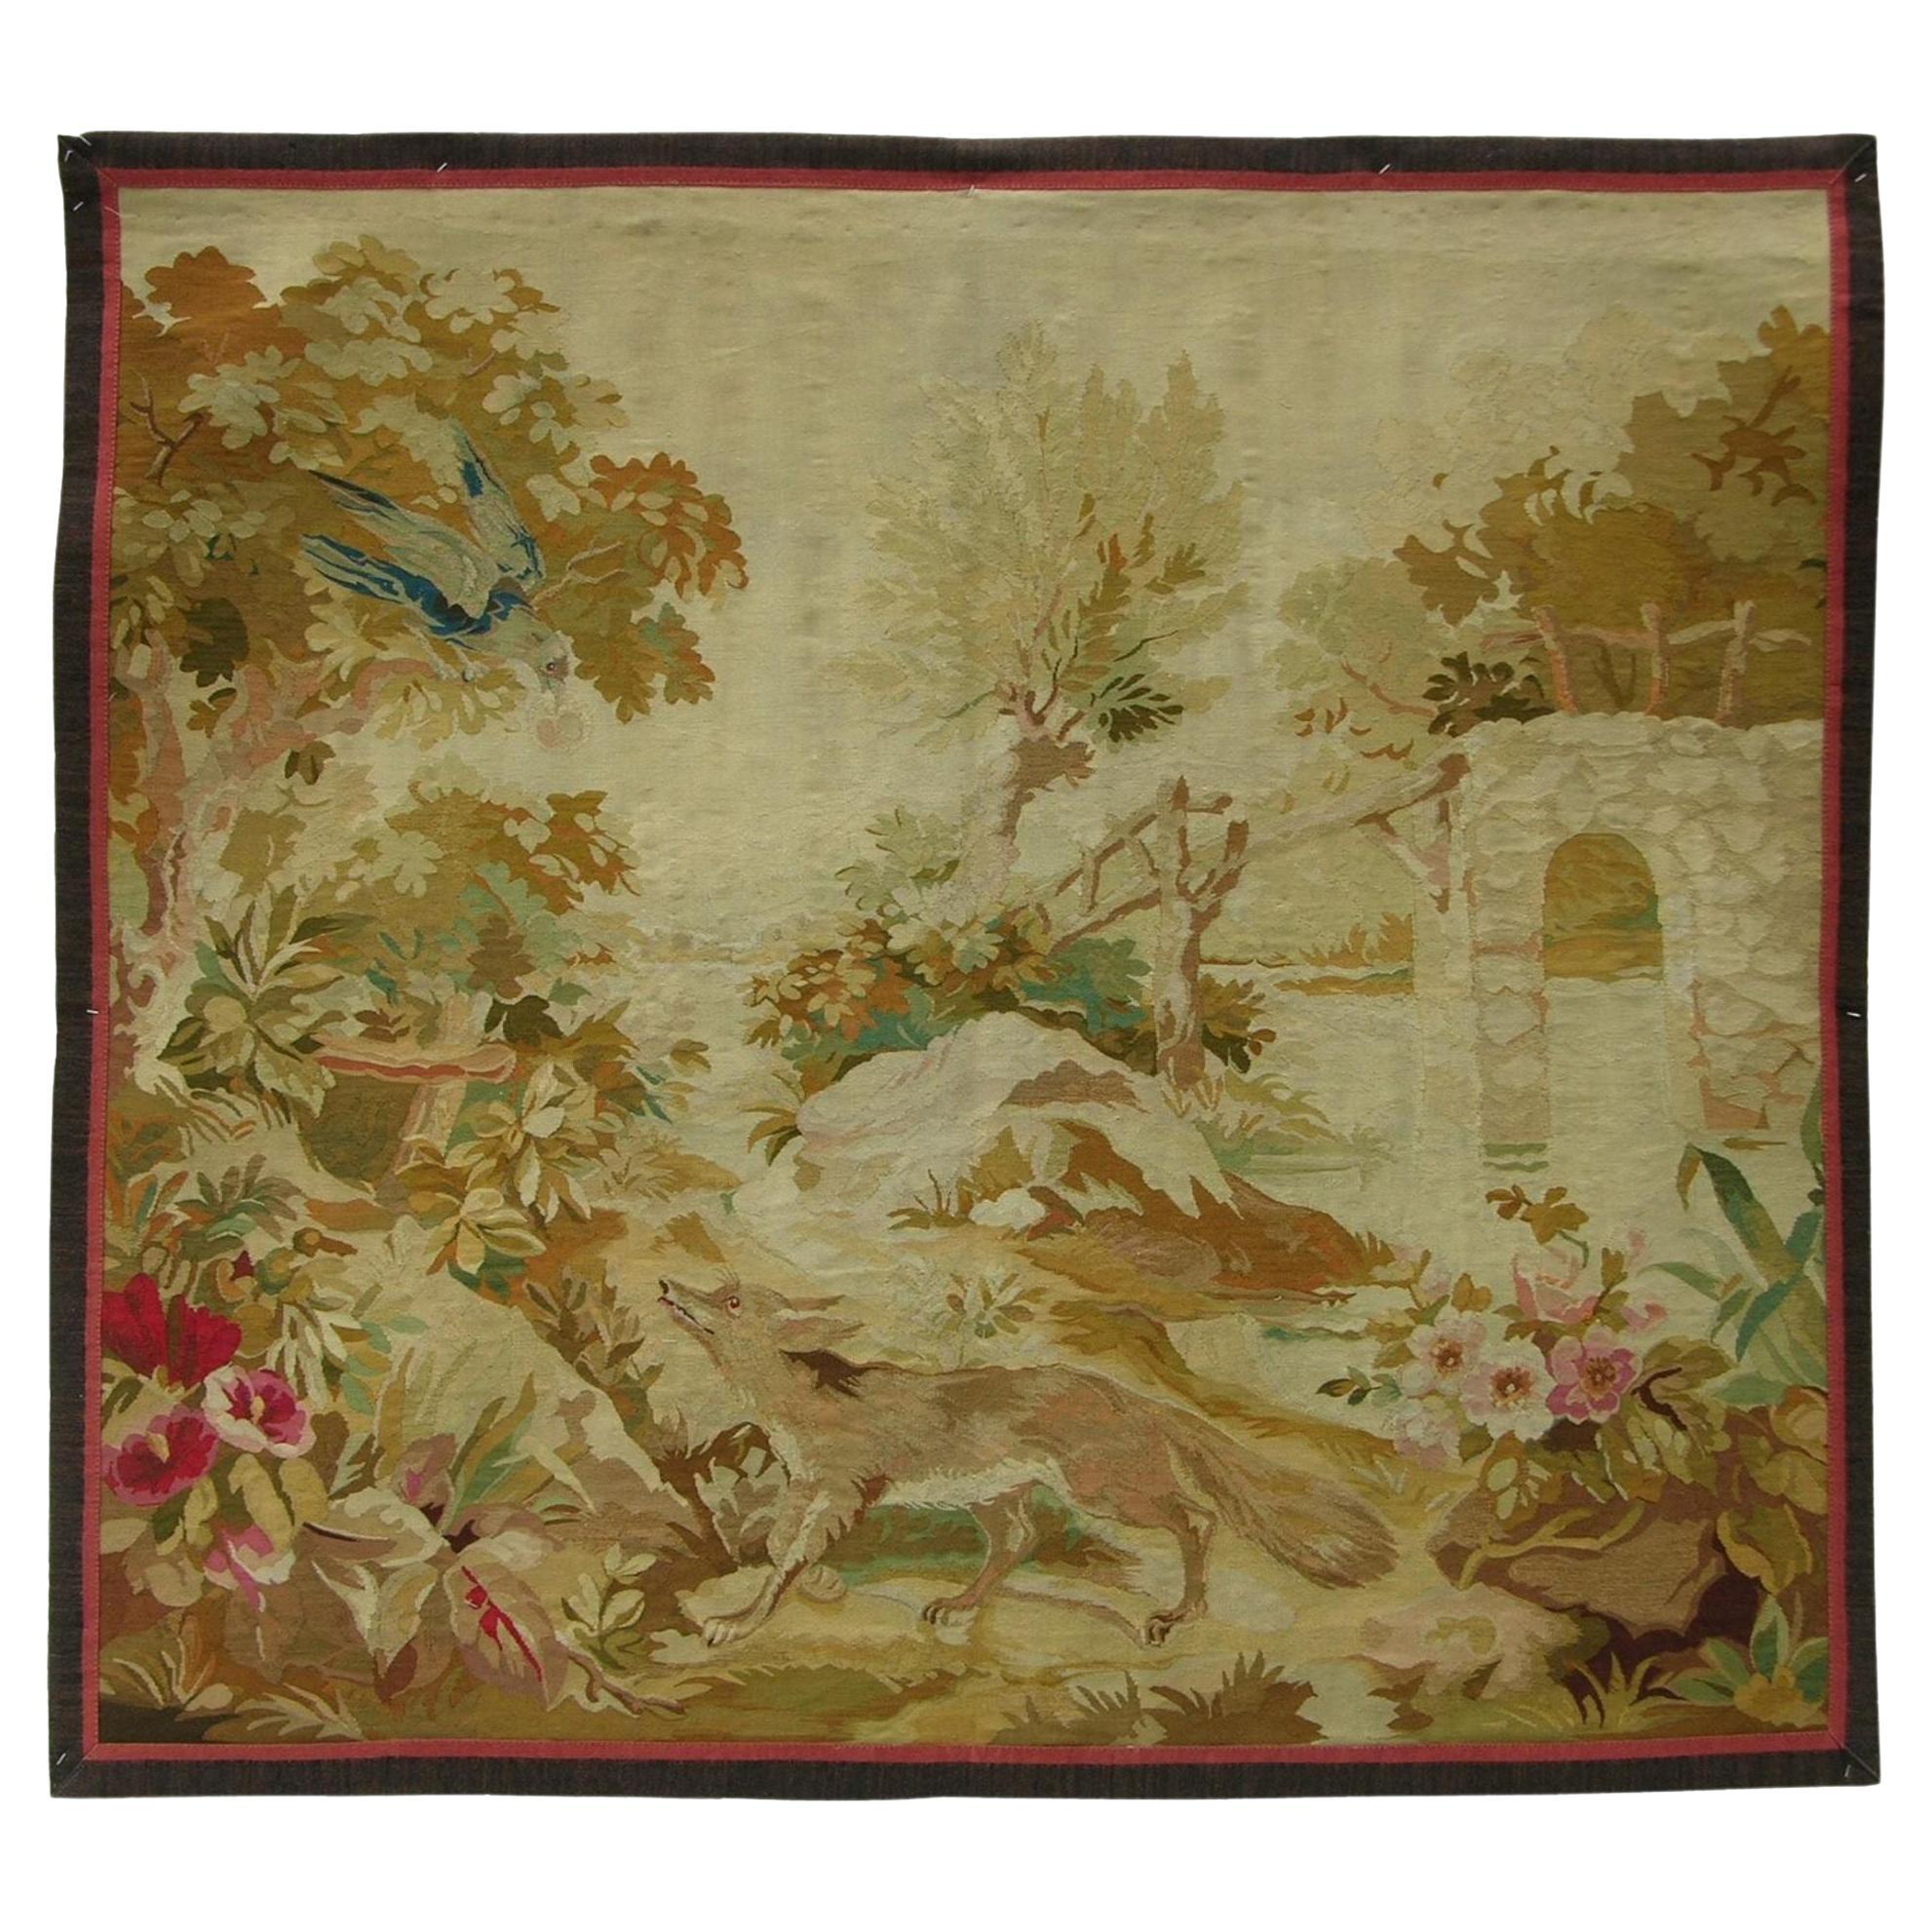 Antique 1900 French Tapestry 5' X 4'6" For Sale